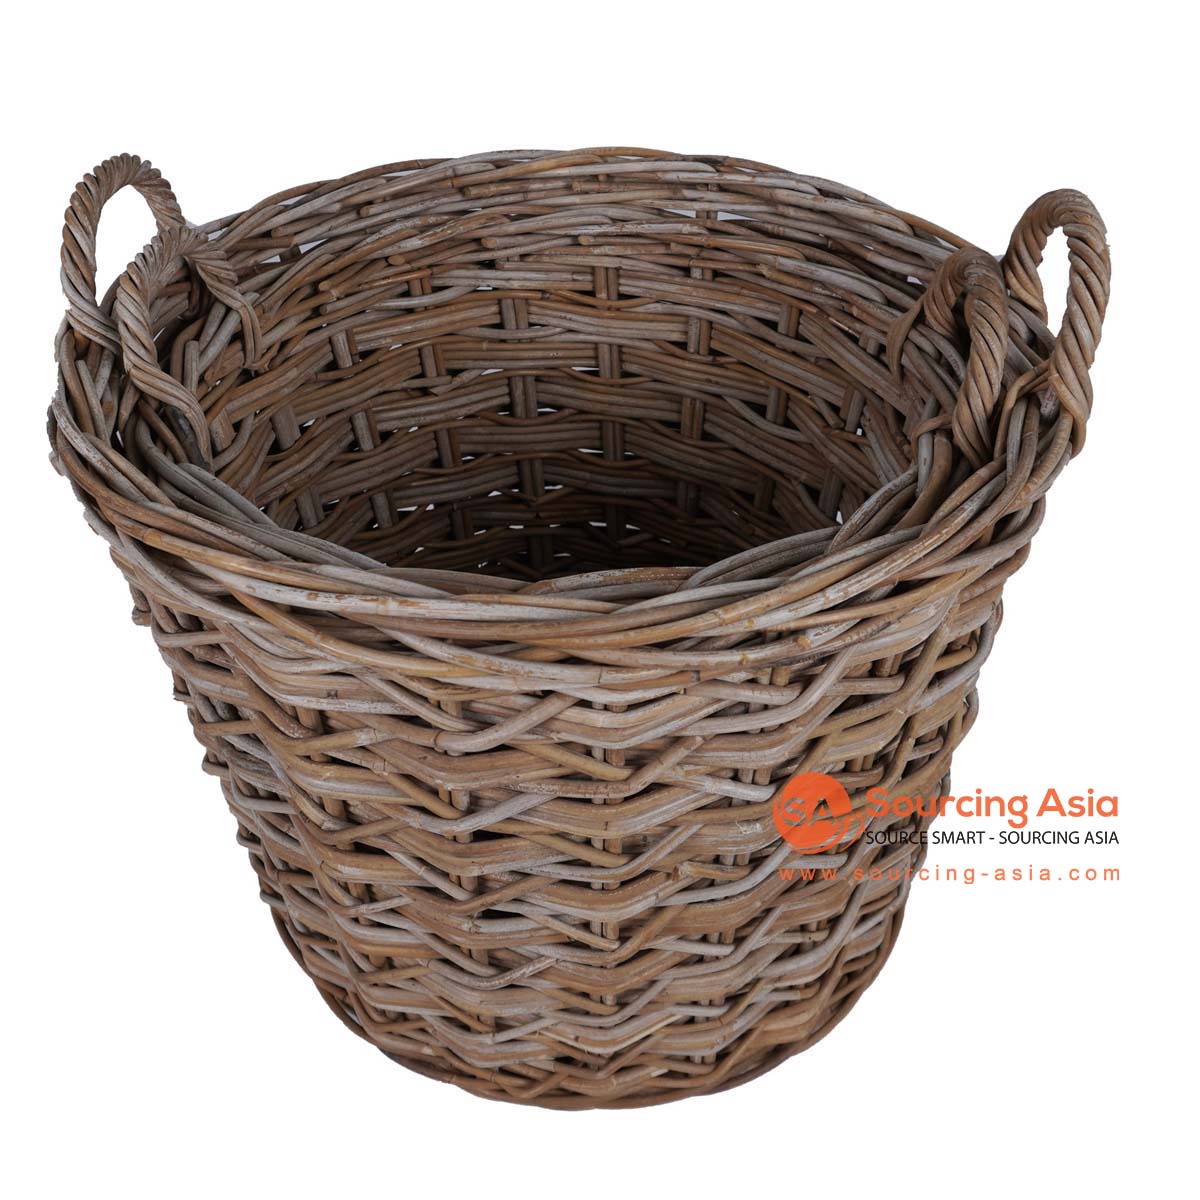 HBSC298 SET OF TWO NATURAL RATTAN ROUND BASKETS WITH HANDLE